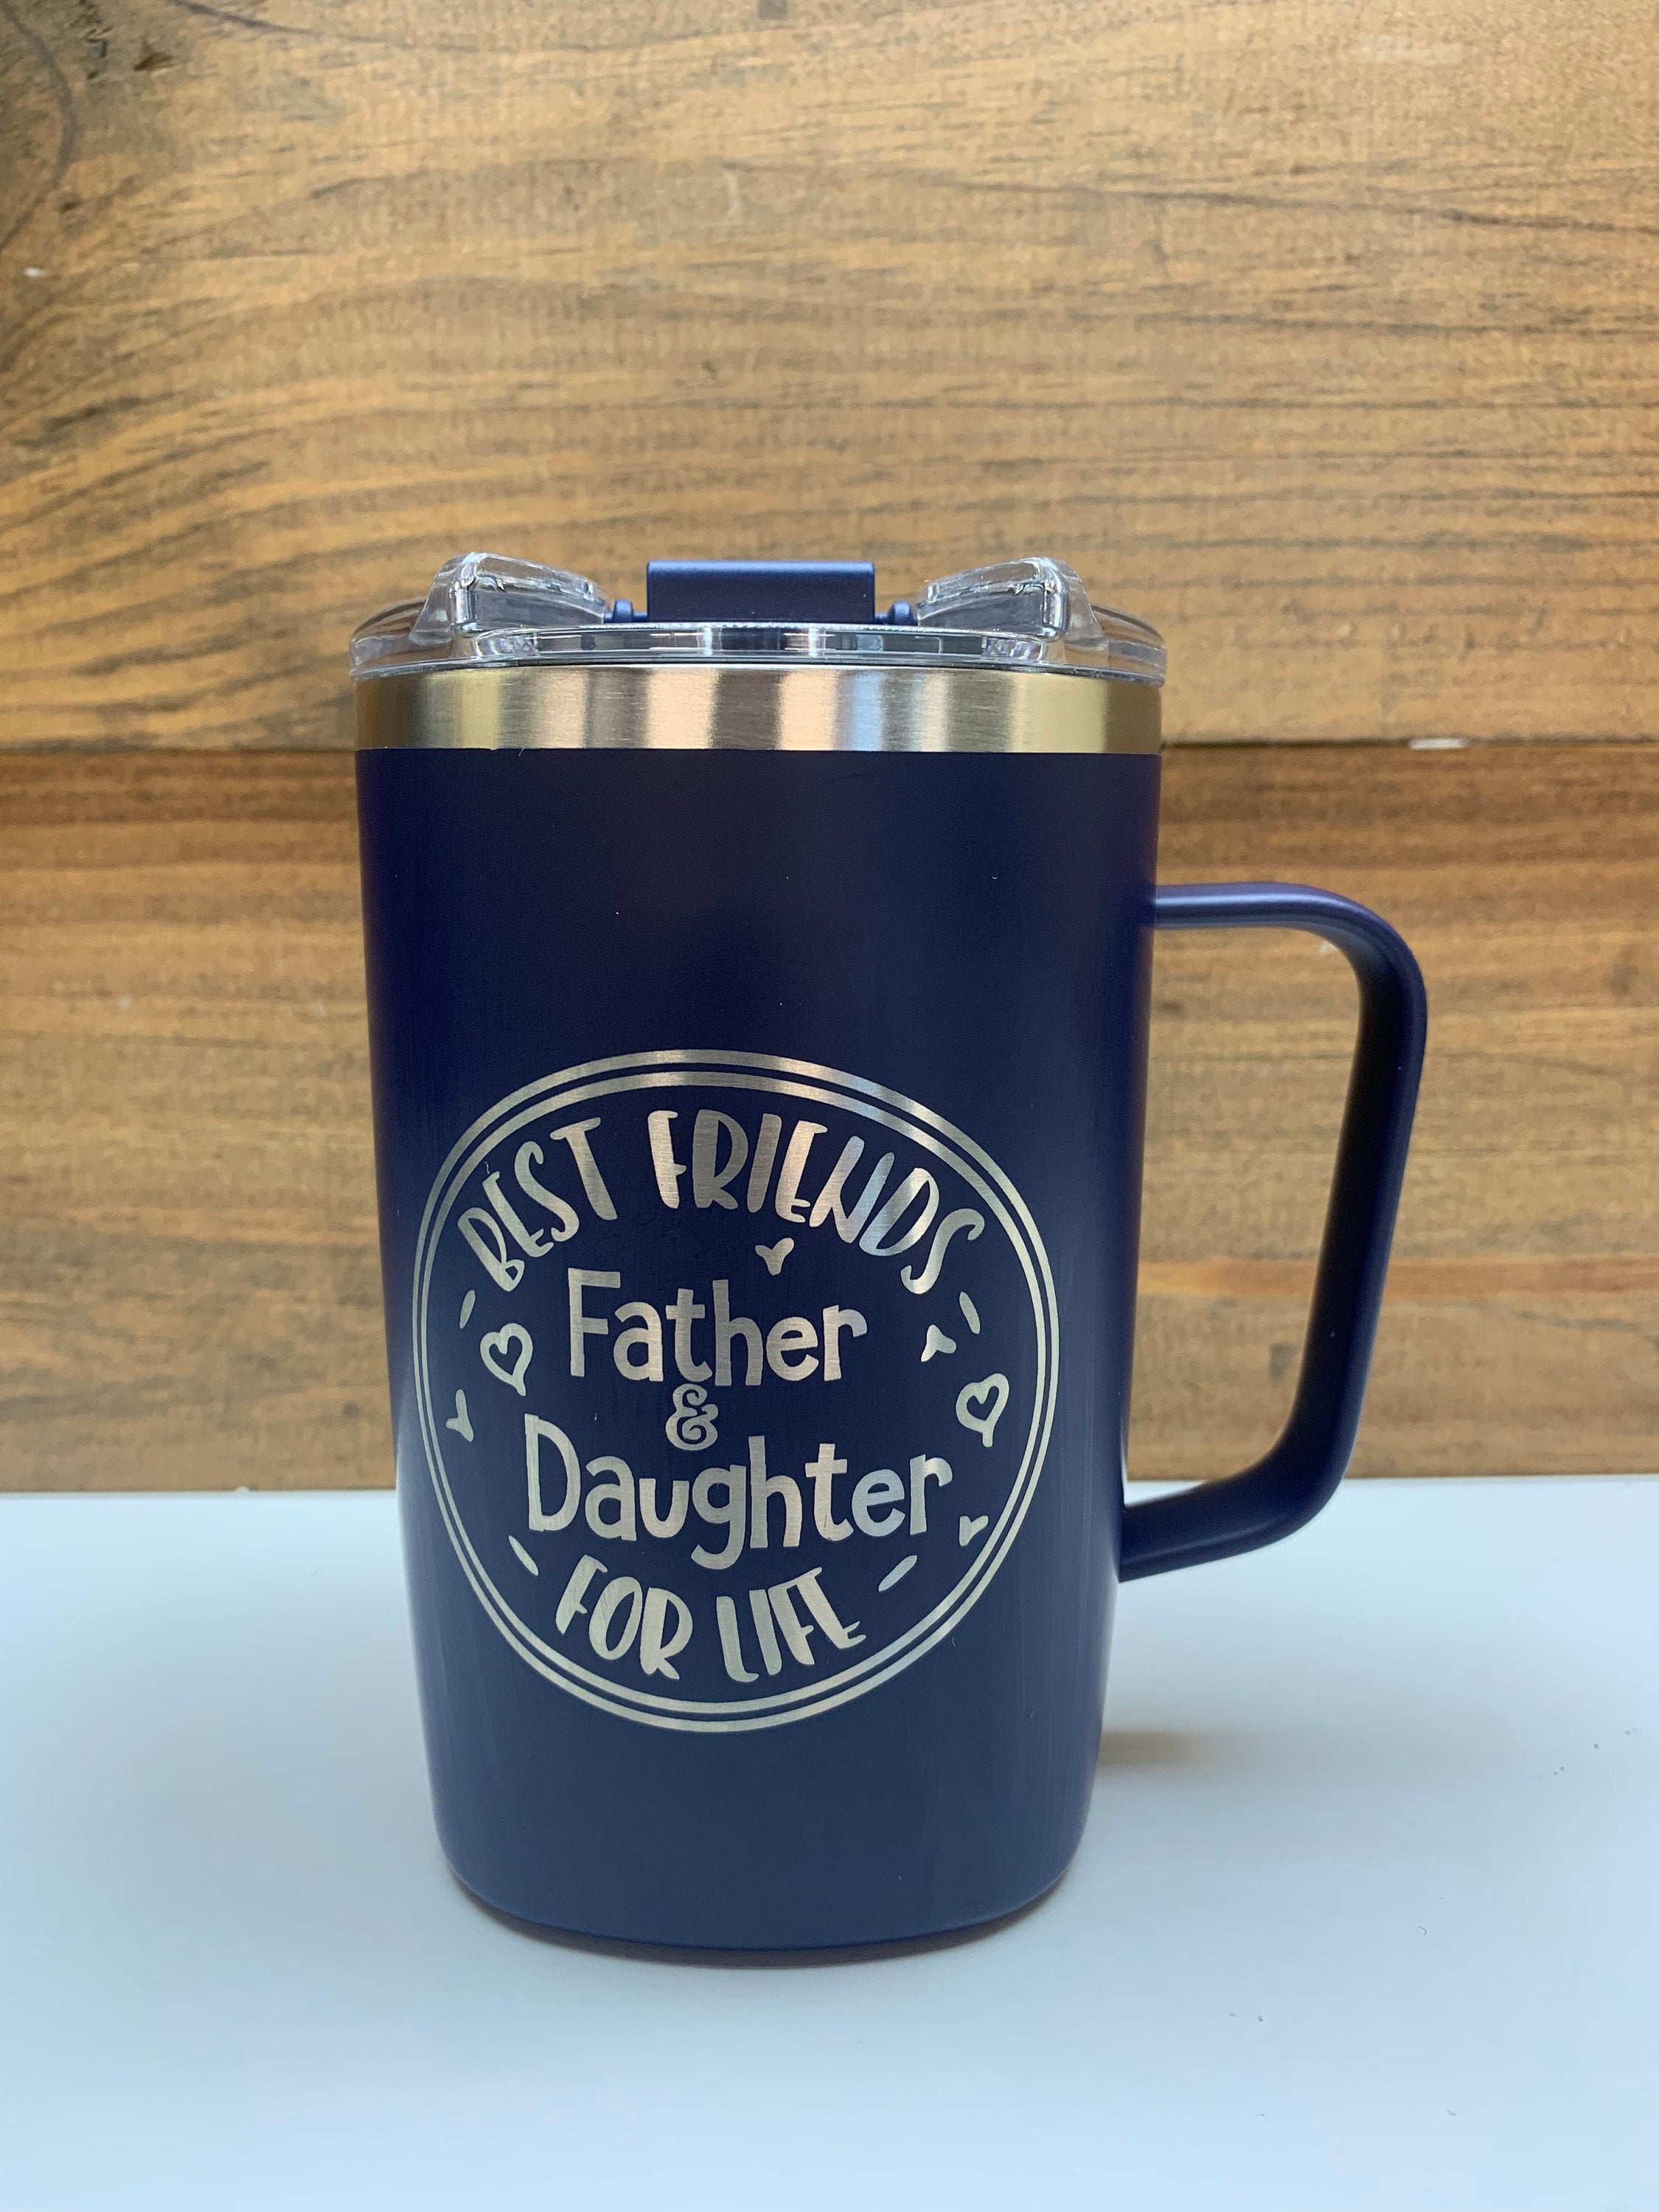  BEST BUCKIN DAD EVER ORANGE 20 oz Drink Tumbler With Straw, Laser Engraved Travel Mug, Compare To Yeti Rambler, Gift Idea Dad For  Father's Day & Birthday